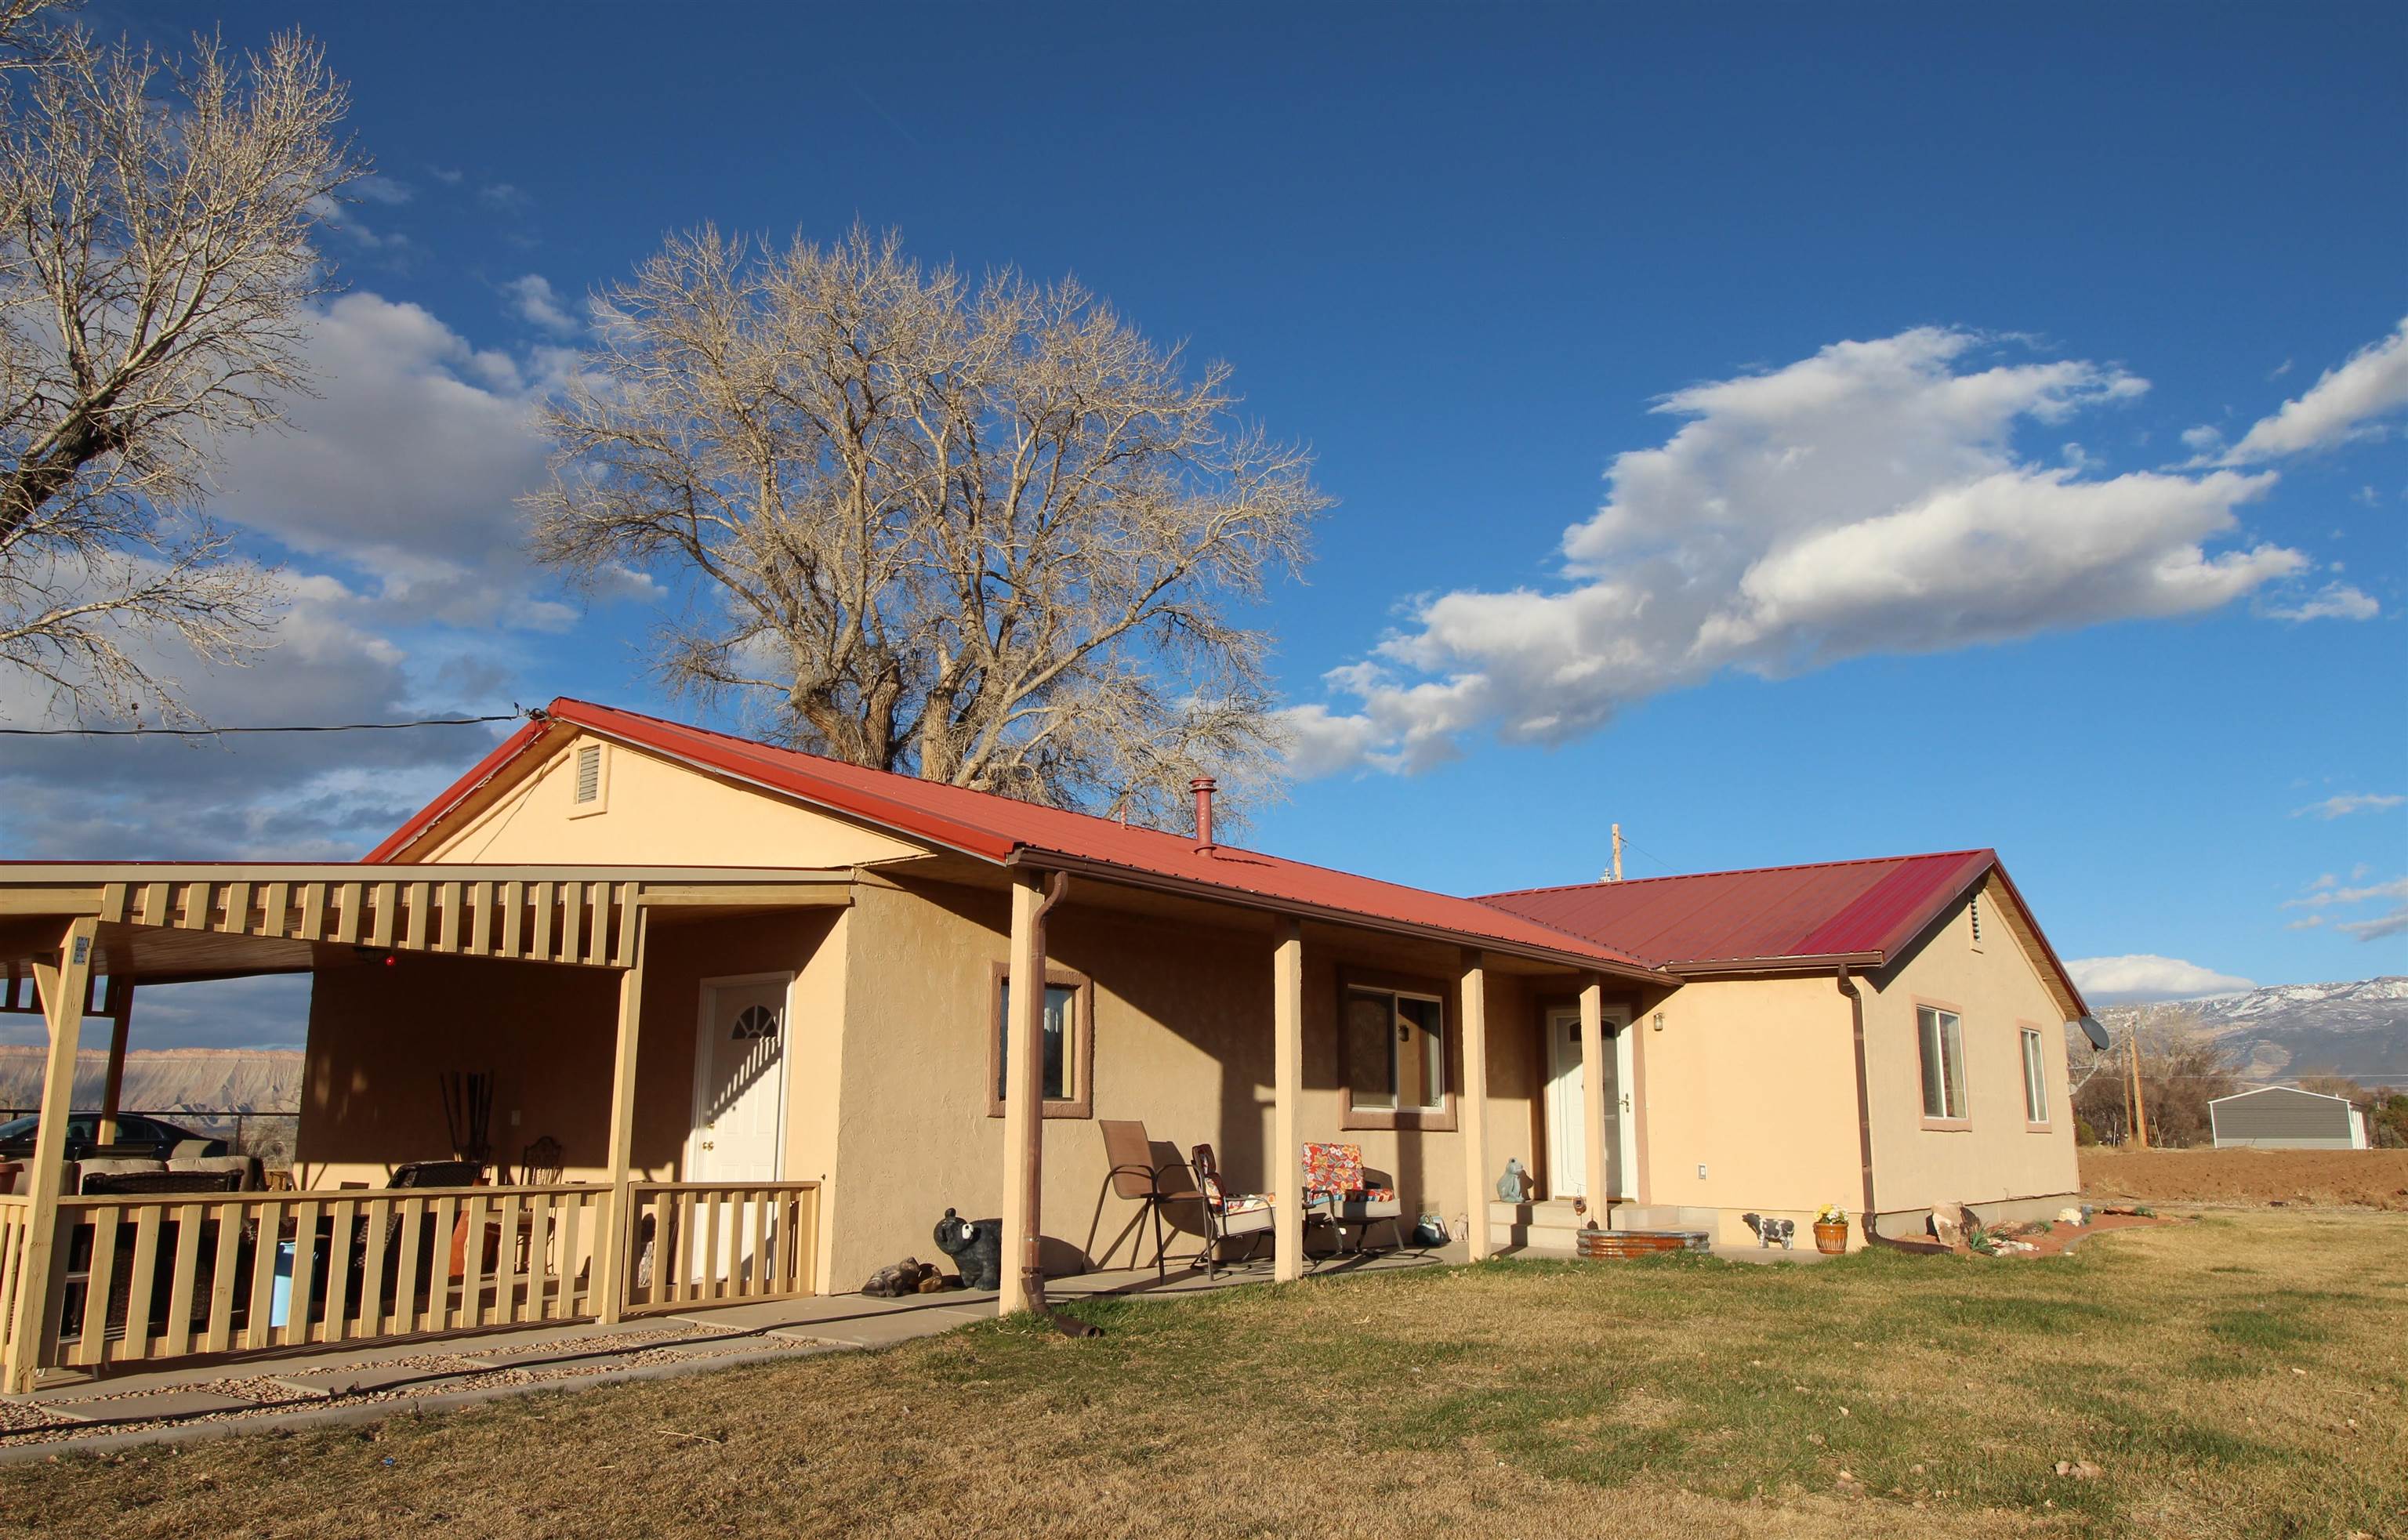 273 31 Road, Grand Junction, CO 81503